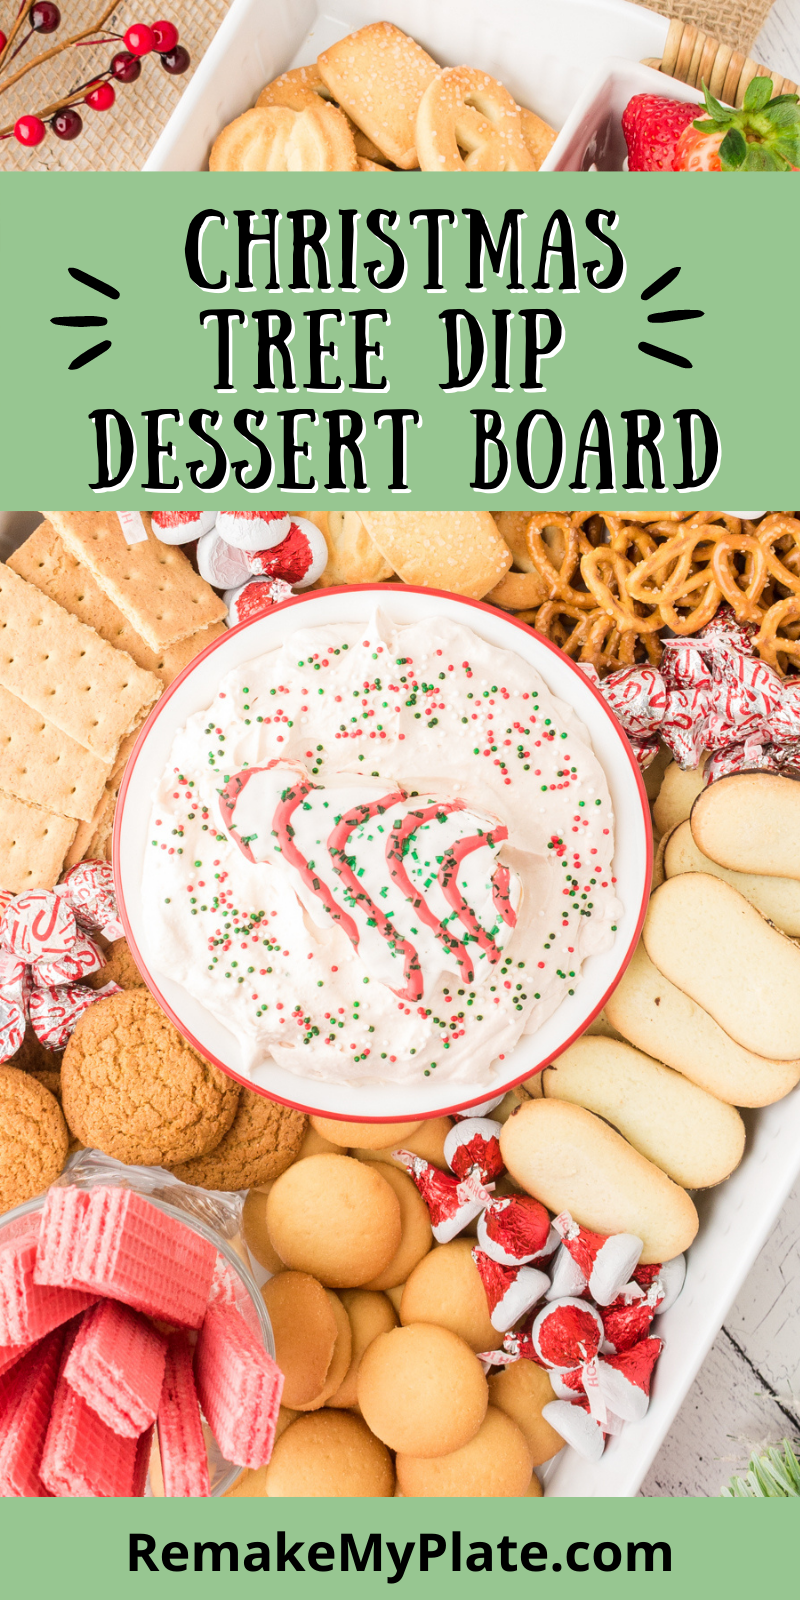 Get ready to feed your family and friends at your next holiday gathering with this Christmas Tree Cake Dip Dessert Charcuterie Board. The dip is so easy to make and you can quickly put this dessert board together in 30 minutes.